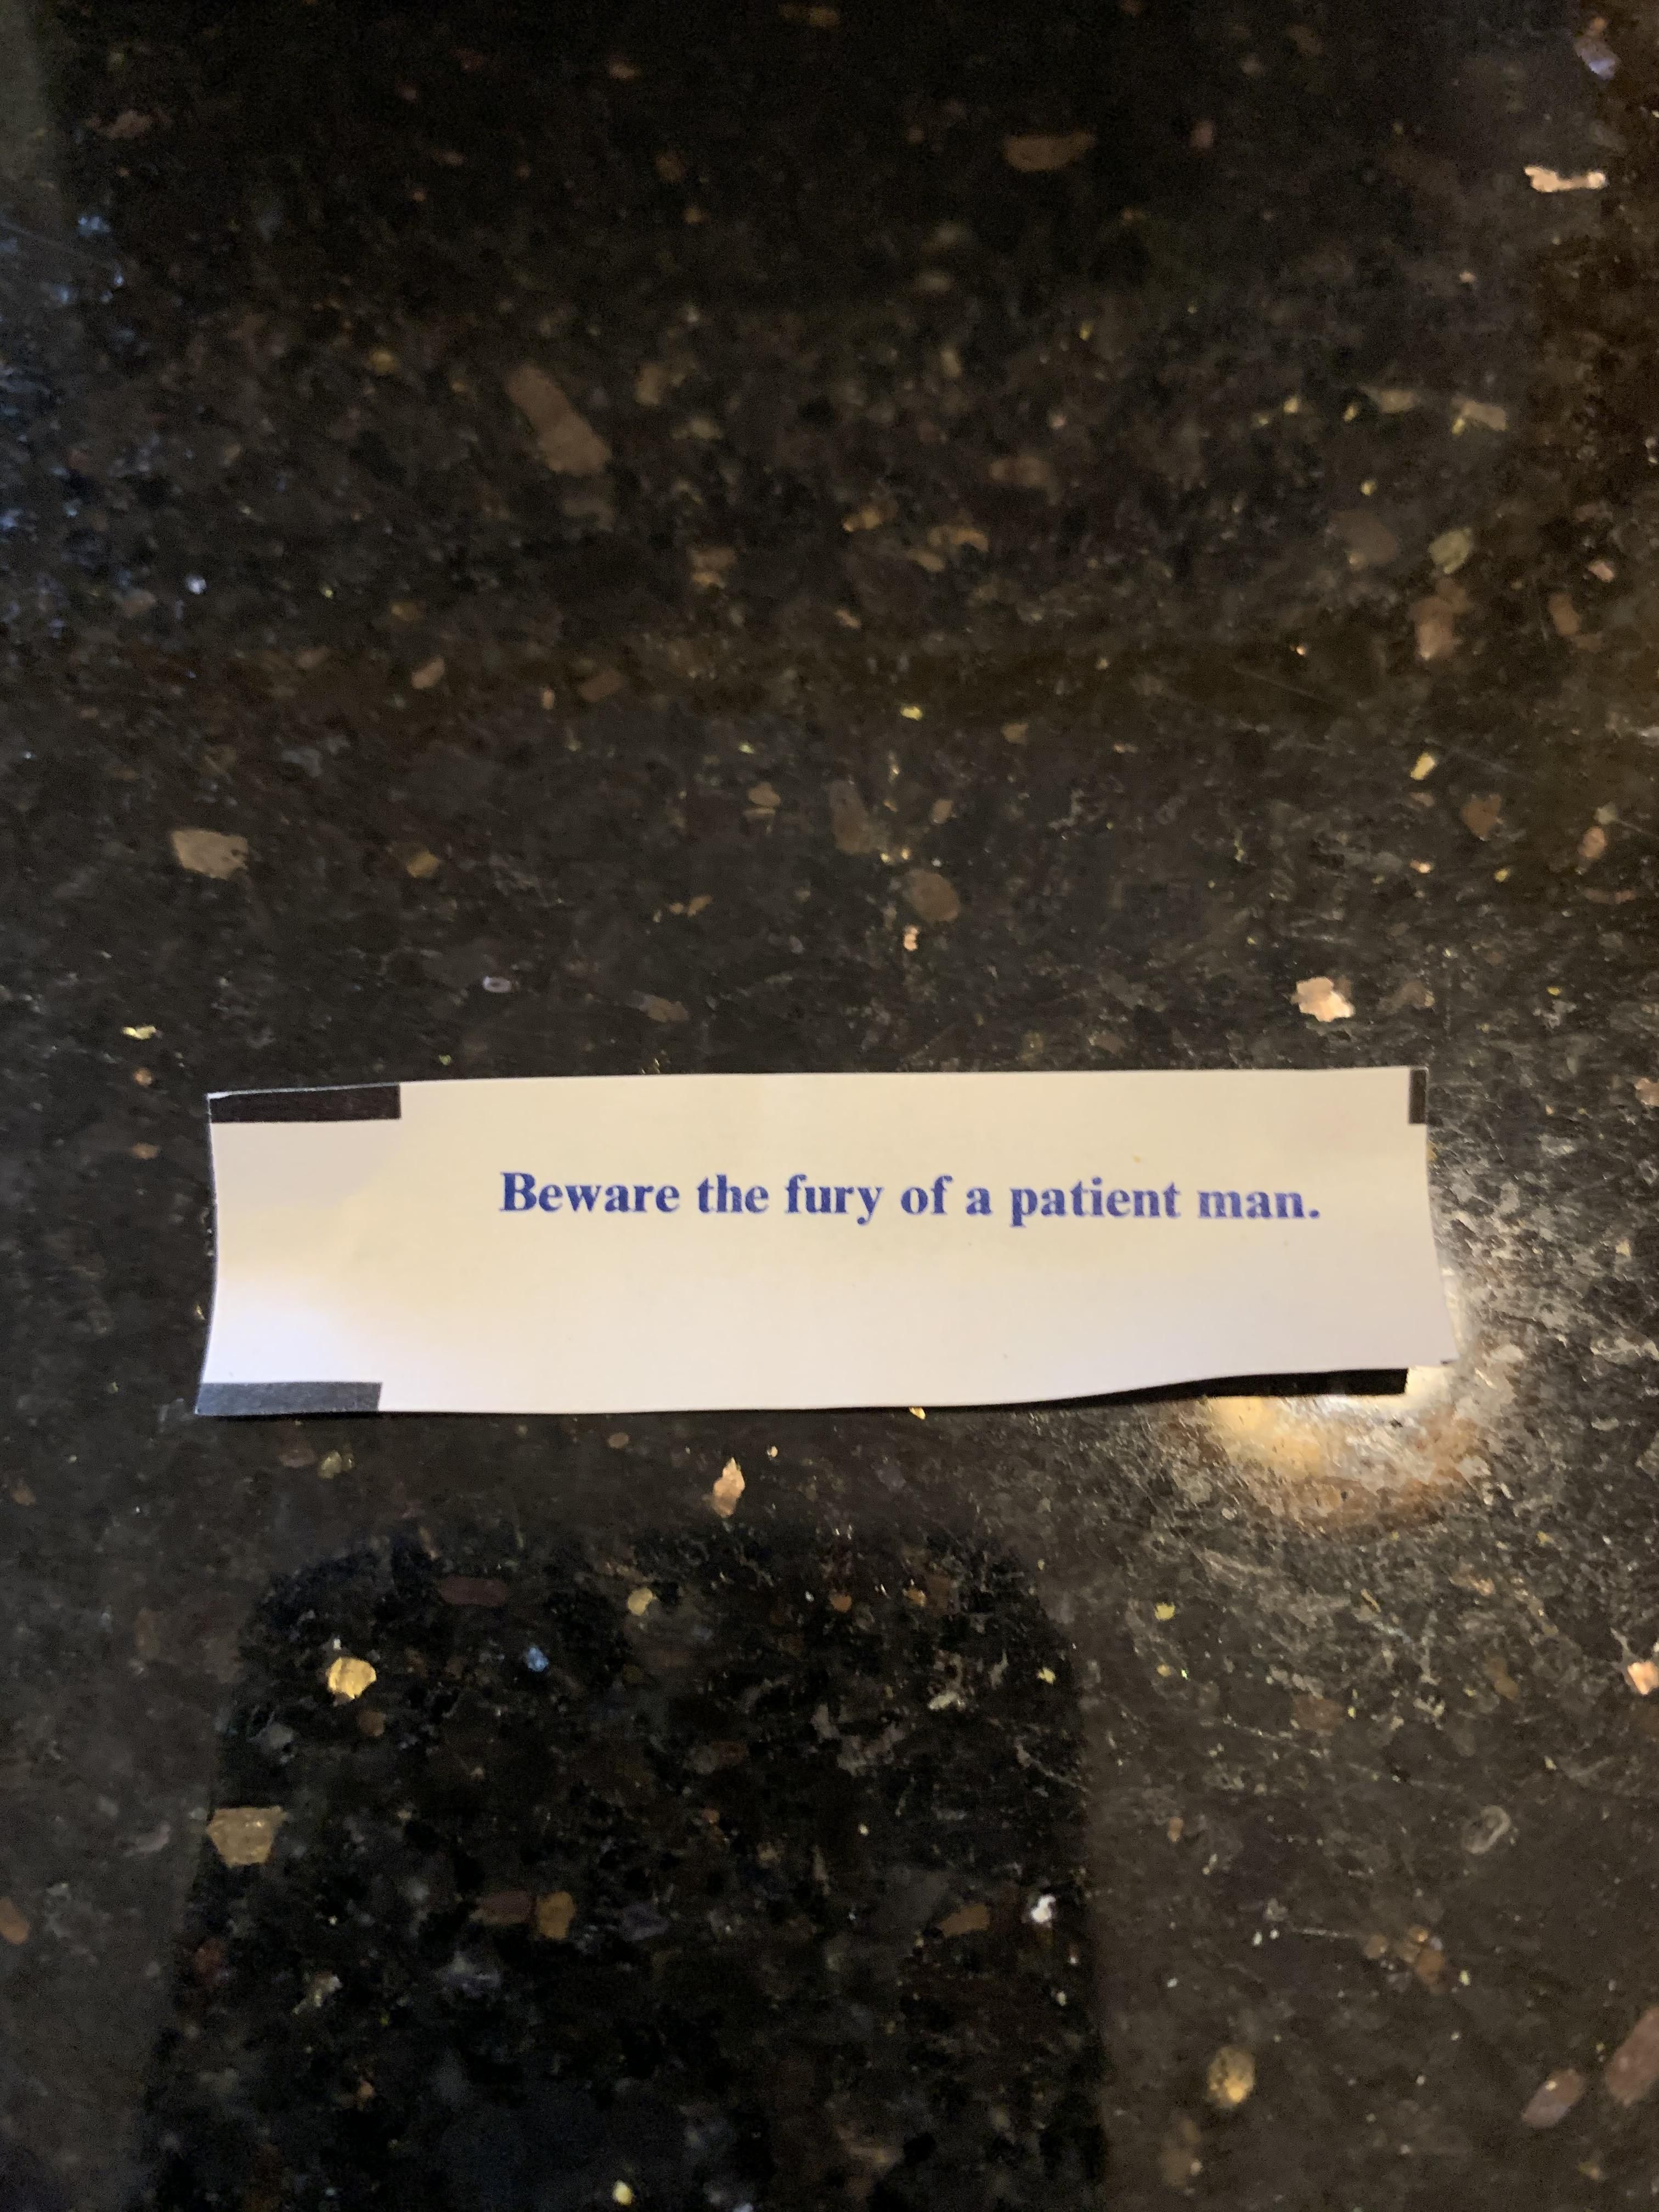 This fortune is haunting.